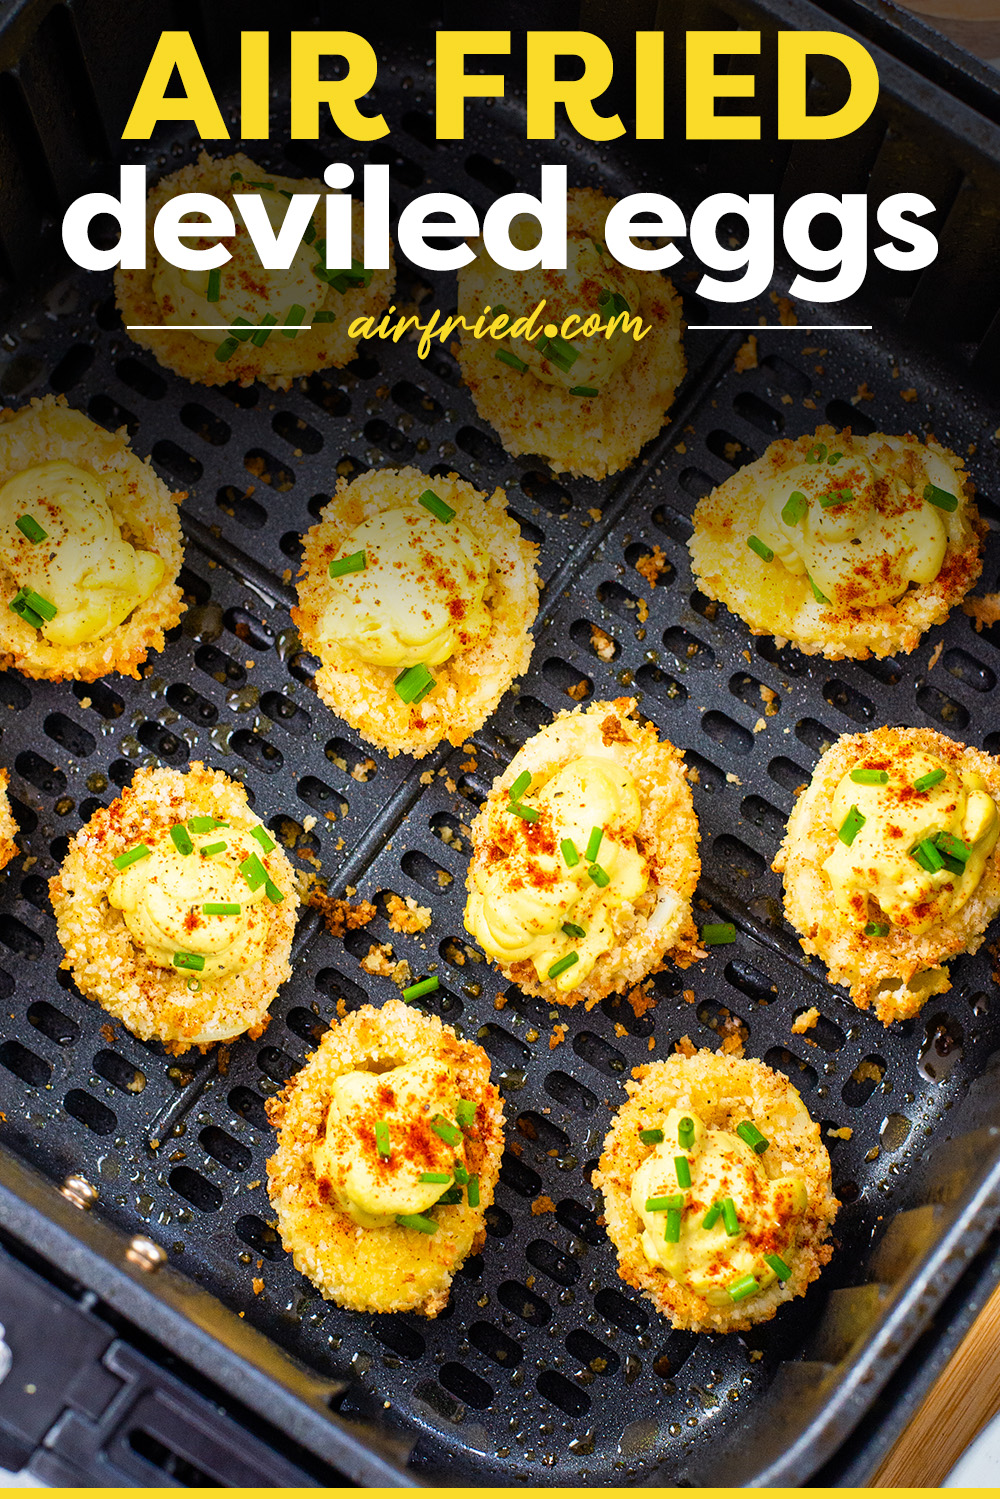 These crispy fried deviled eggs were made in the air fryer!  You have to see how easy this amazing snack was to make!